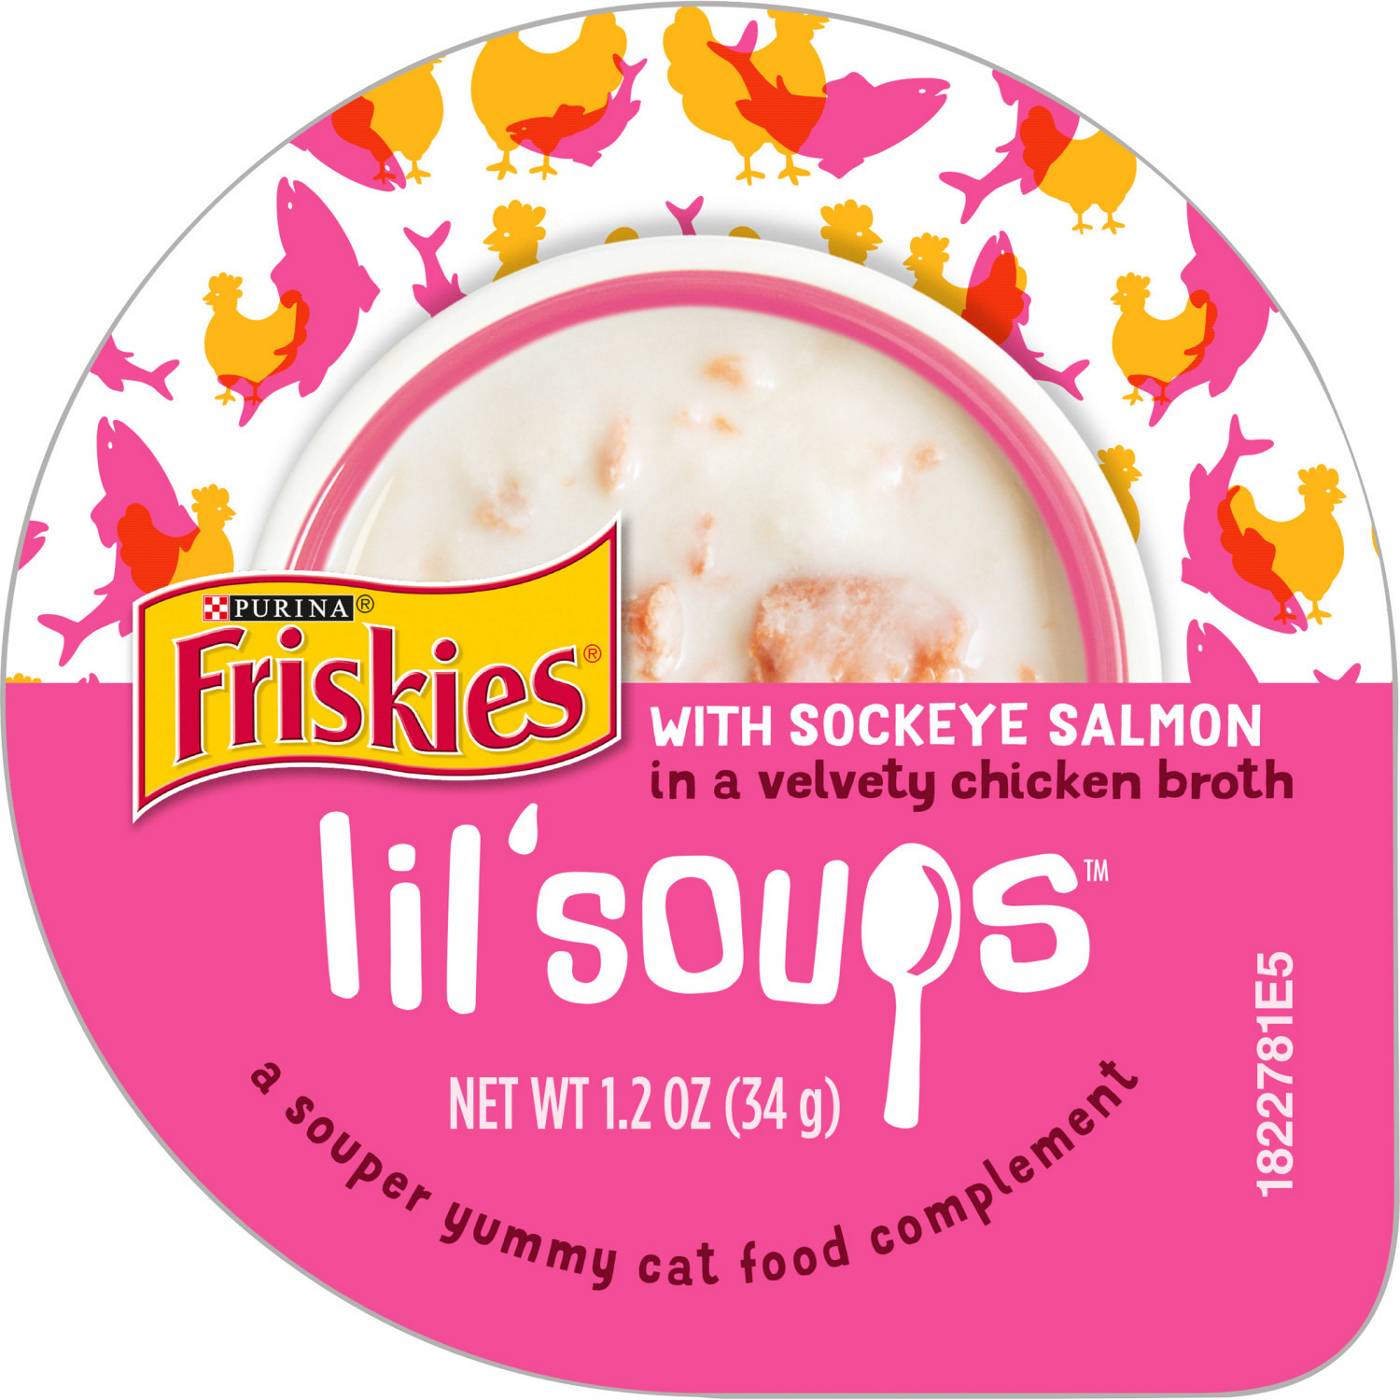 Friskies Purina Friskies Natural, Grain Free Wet Cat Food Lickable Cat Treats, Lil' Soups With Sockeye Salmon in Chicken Broth; image 1 of 6